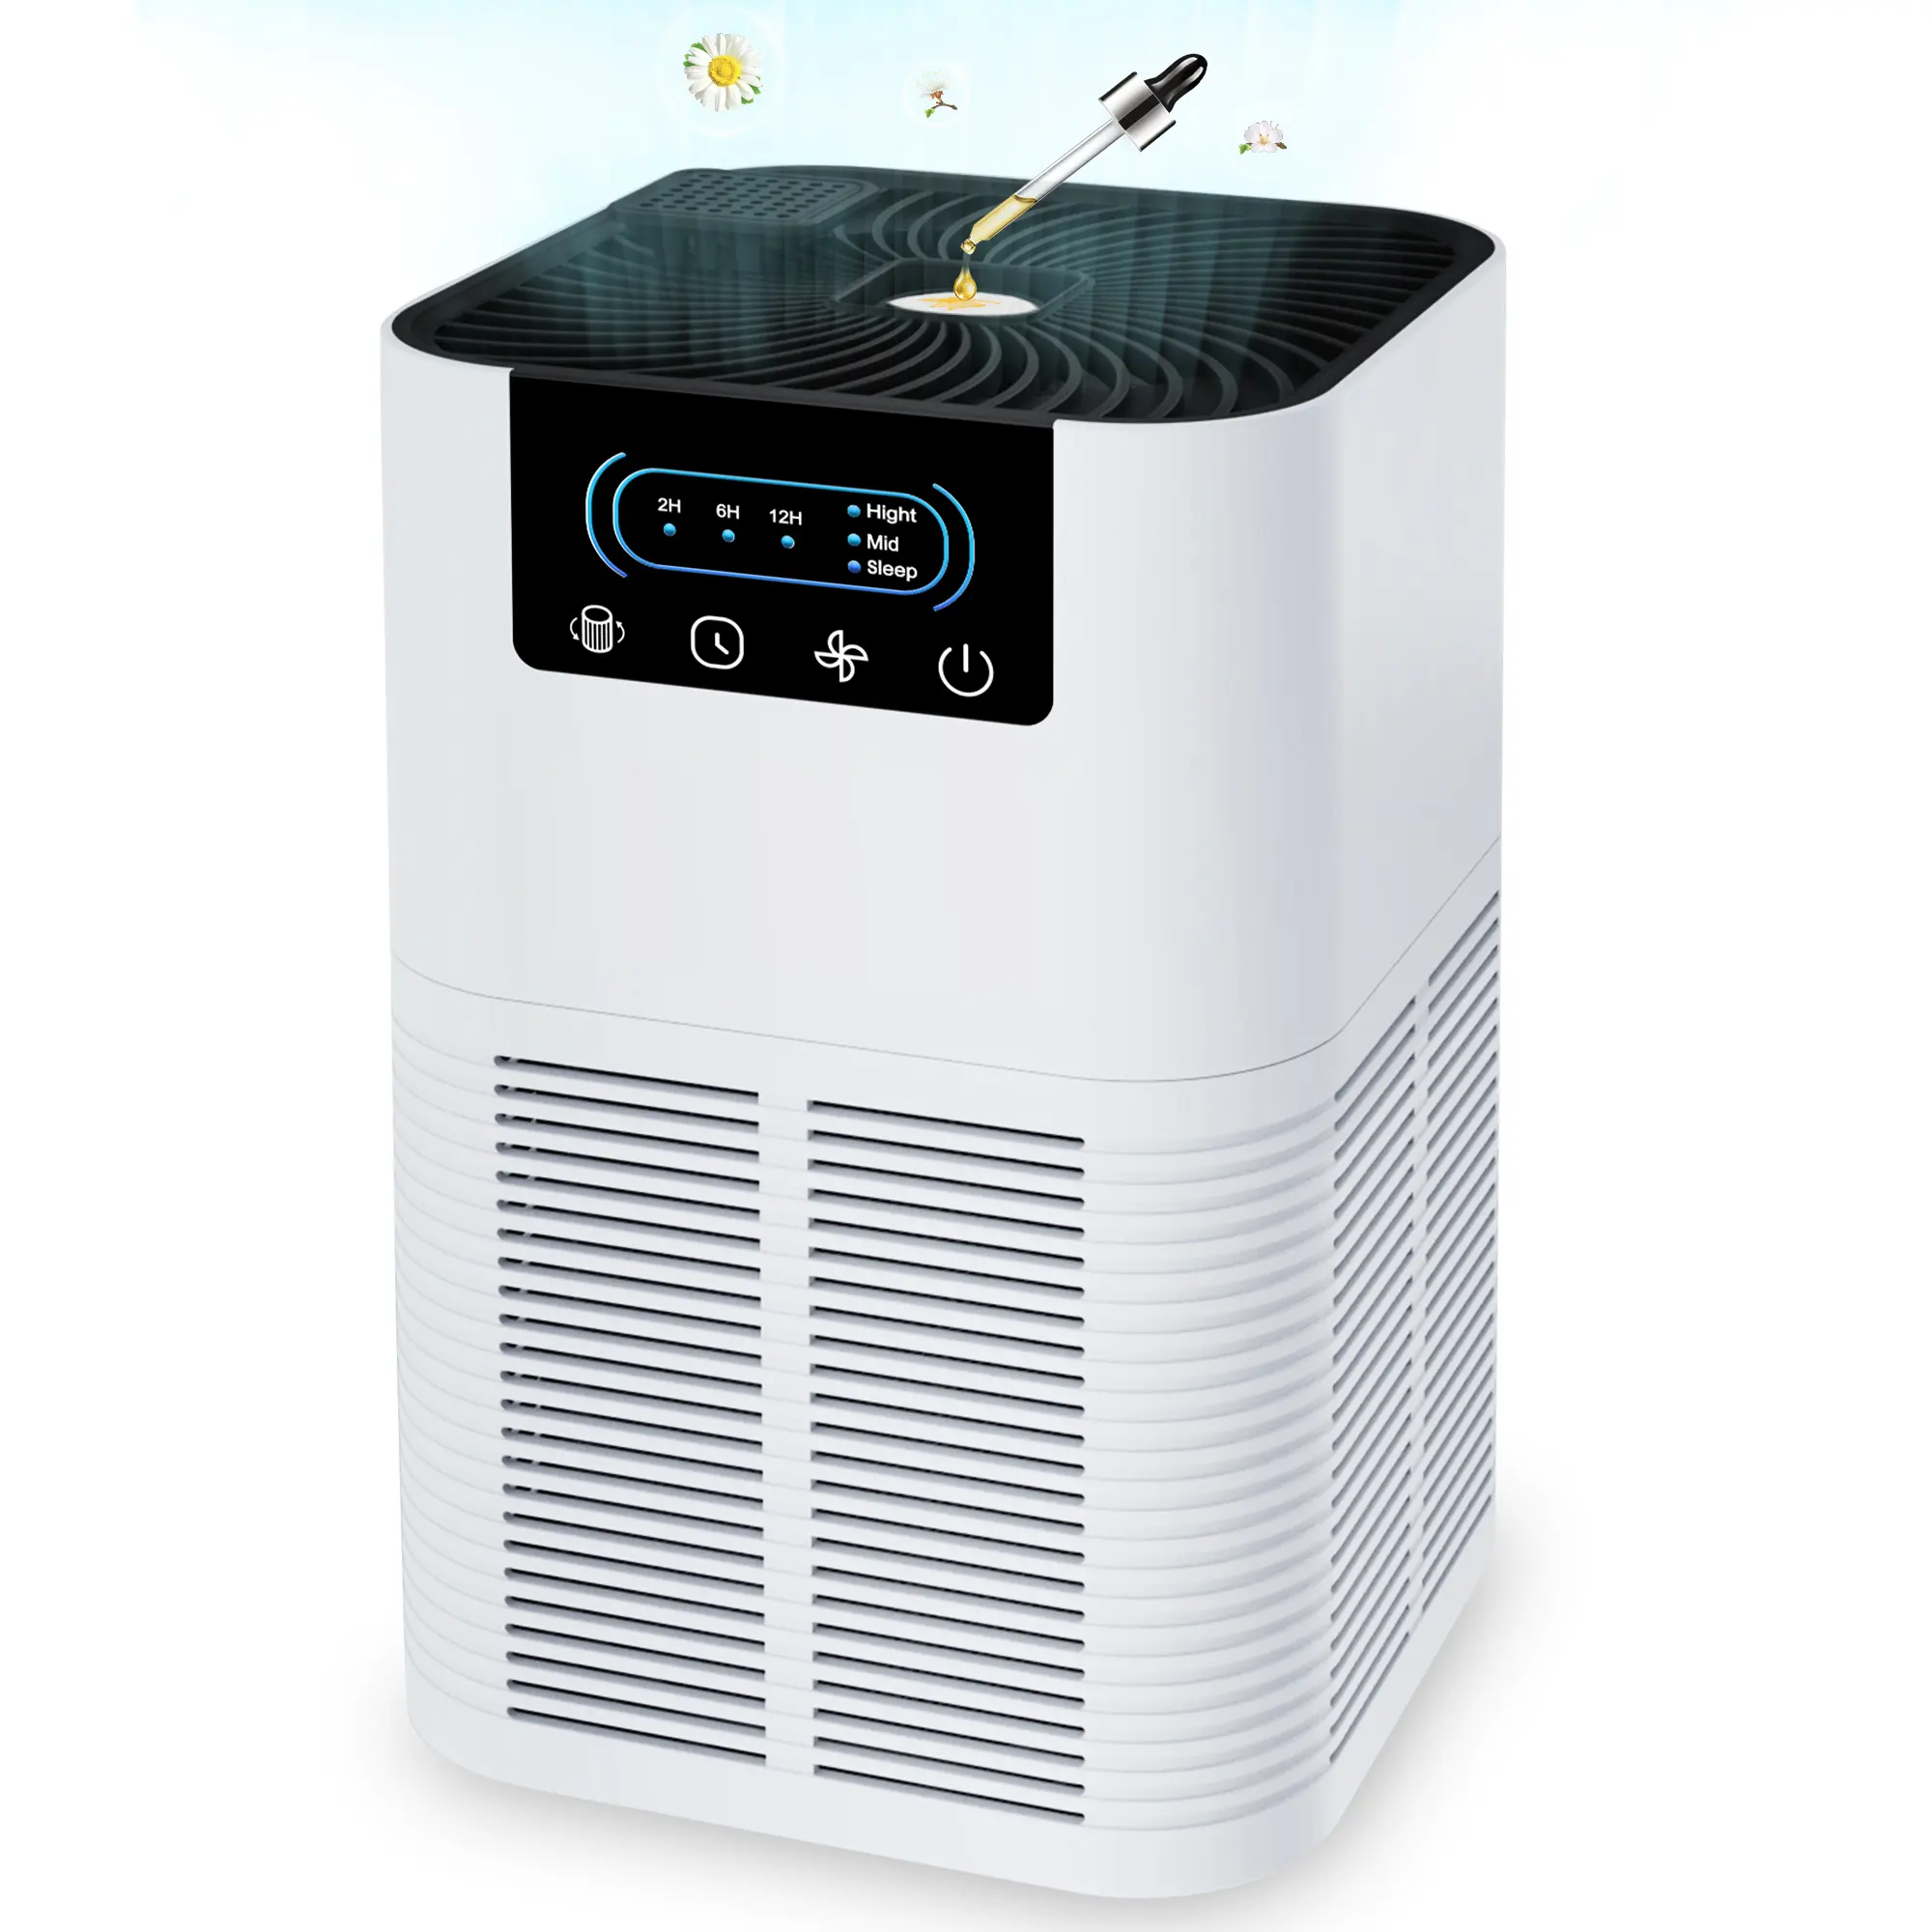 3 Stage Composite Filter air purifier home air fresher purifier for Keeping Better Breathe During Pollen season